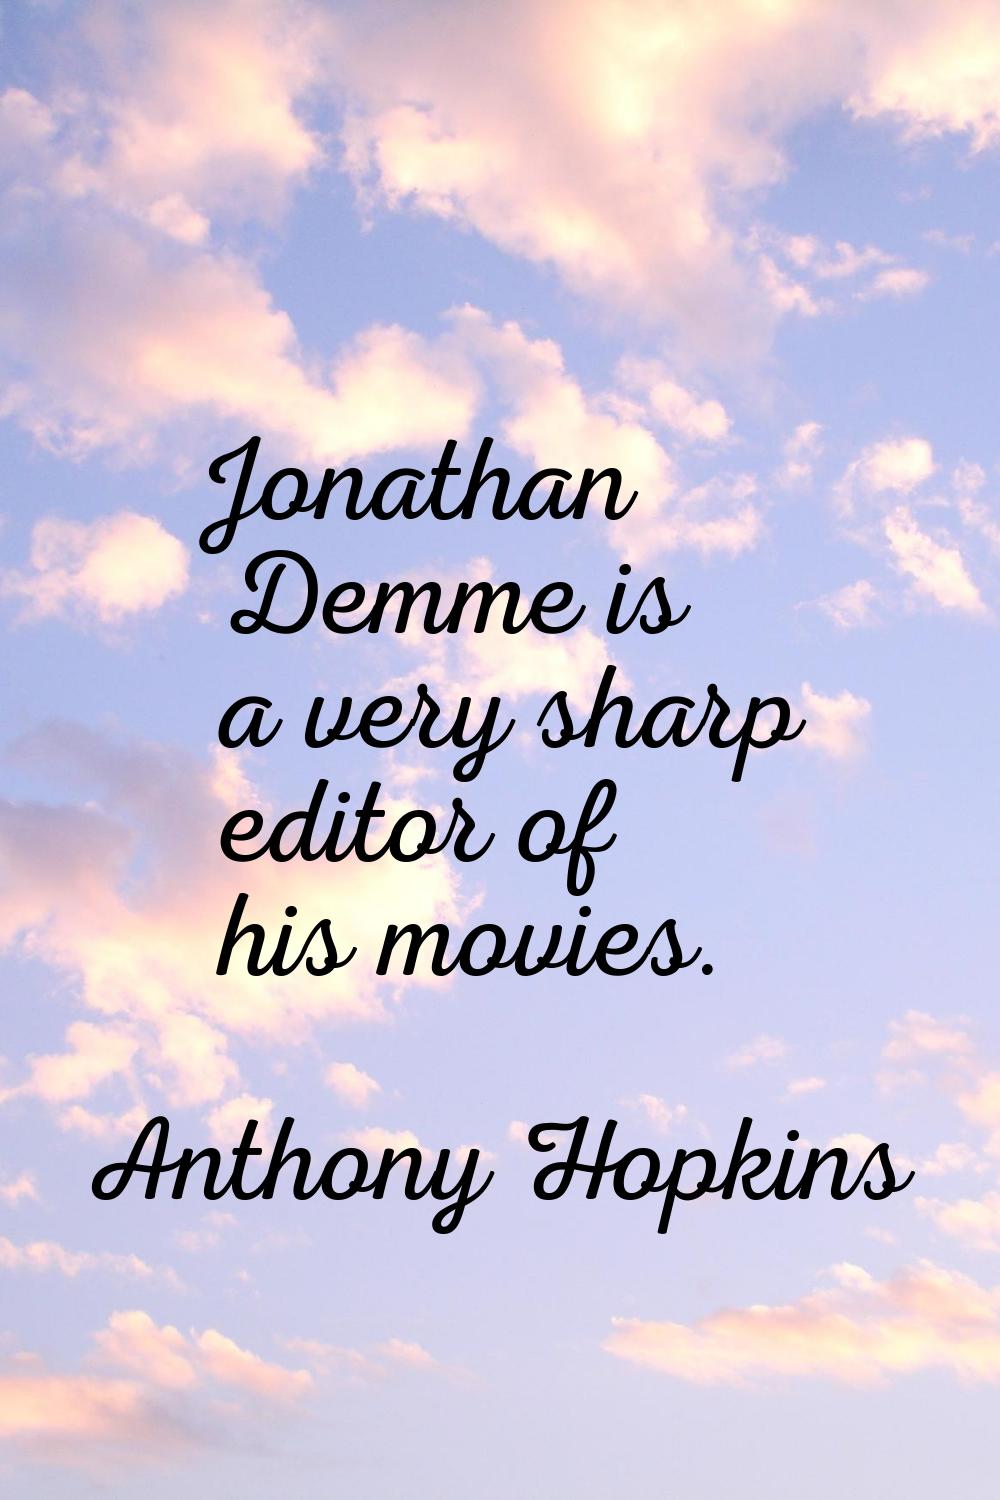 Jonathan Demme is a very sharp editor of his movies.